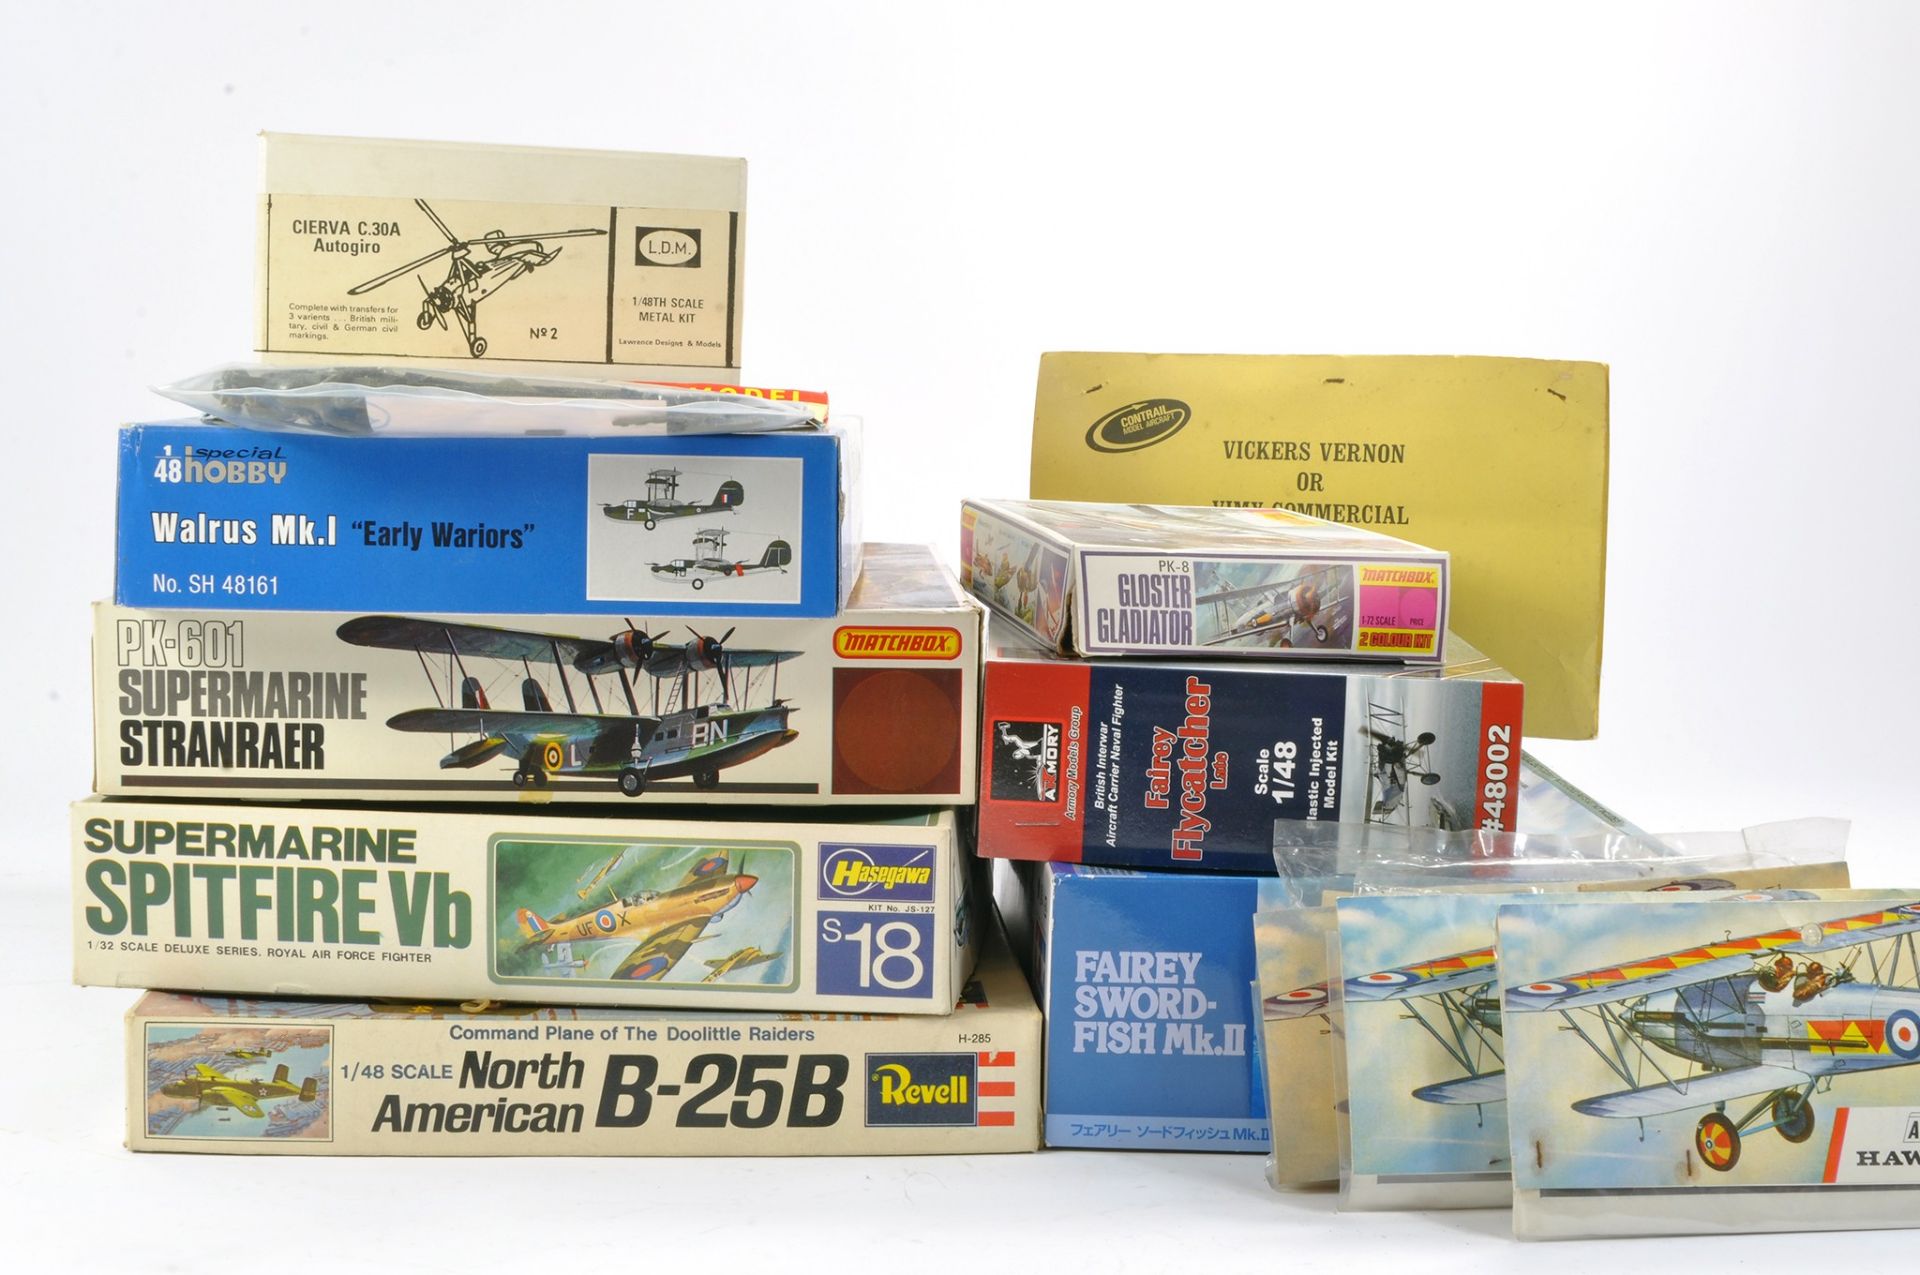 Thirteen Plastic Model Kits, including boxed and bagged issues from Airfix, Hasegawa, LDM (White